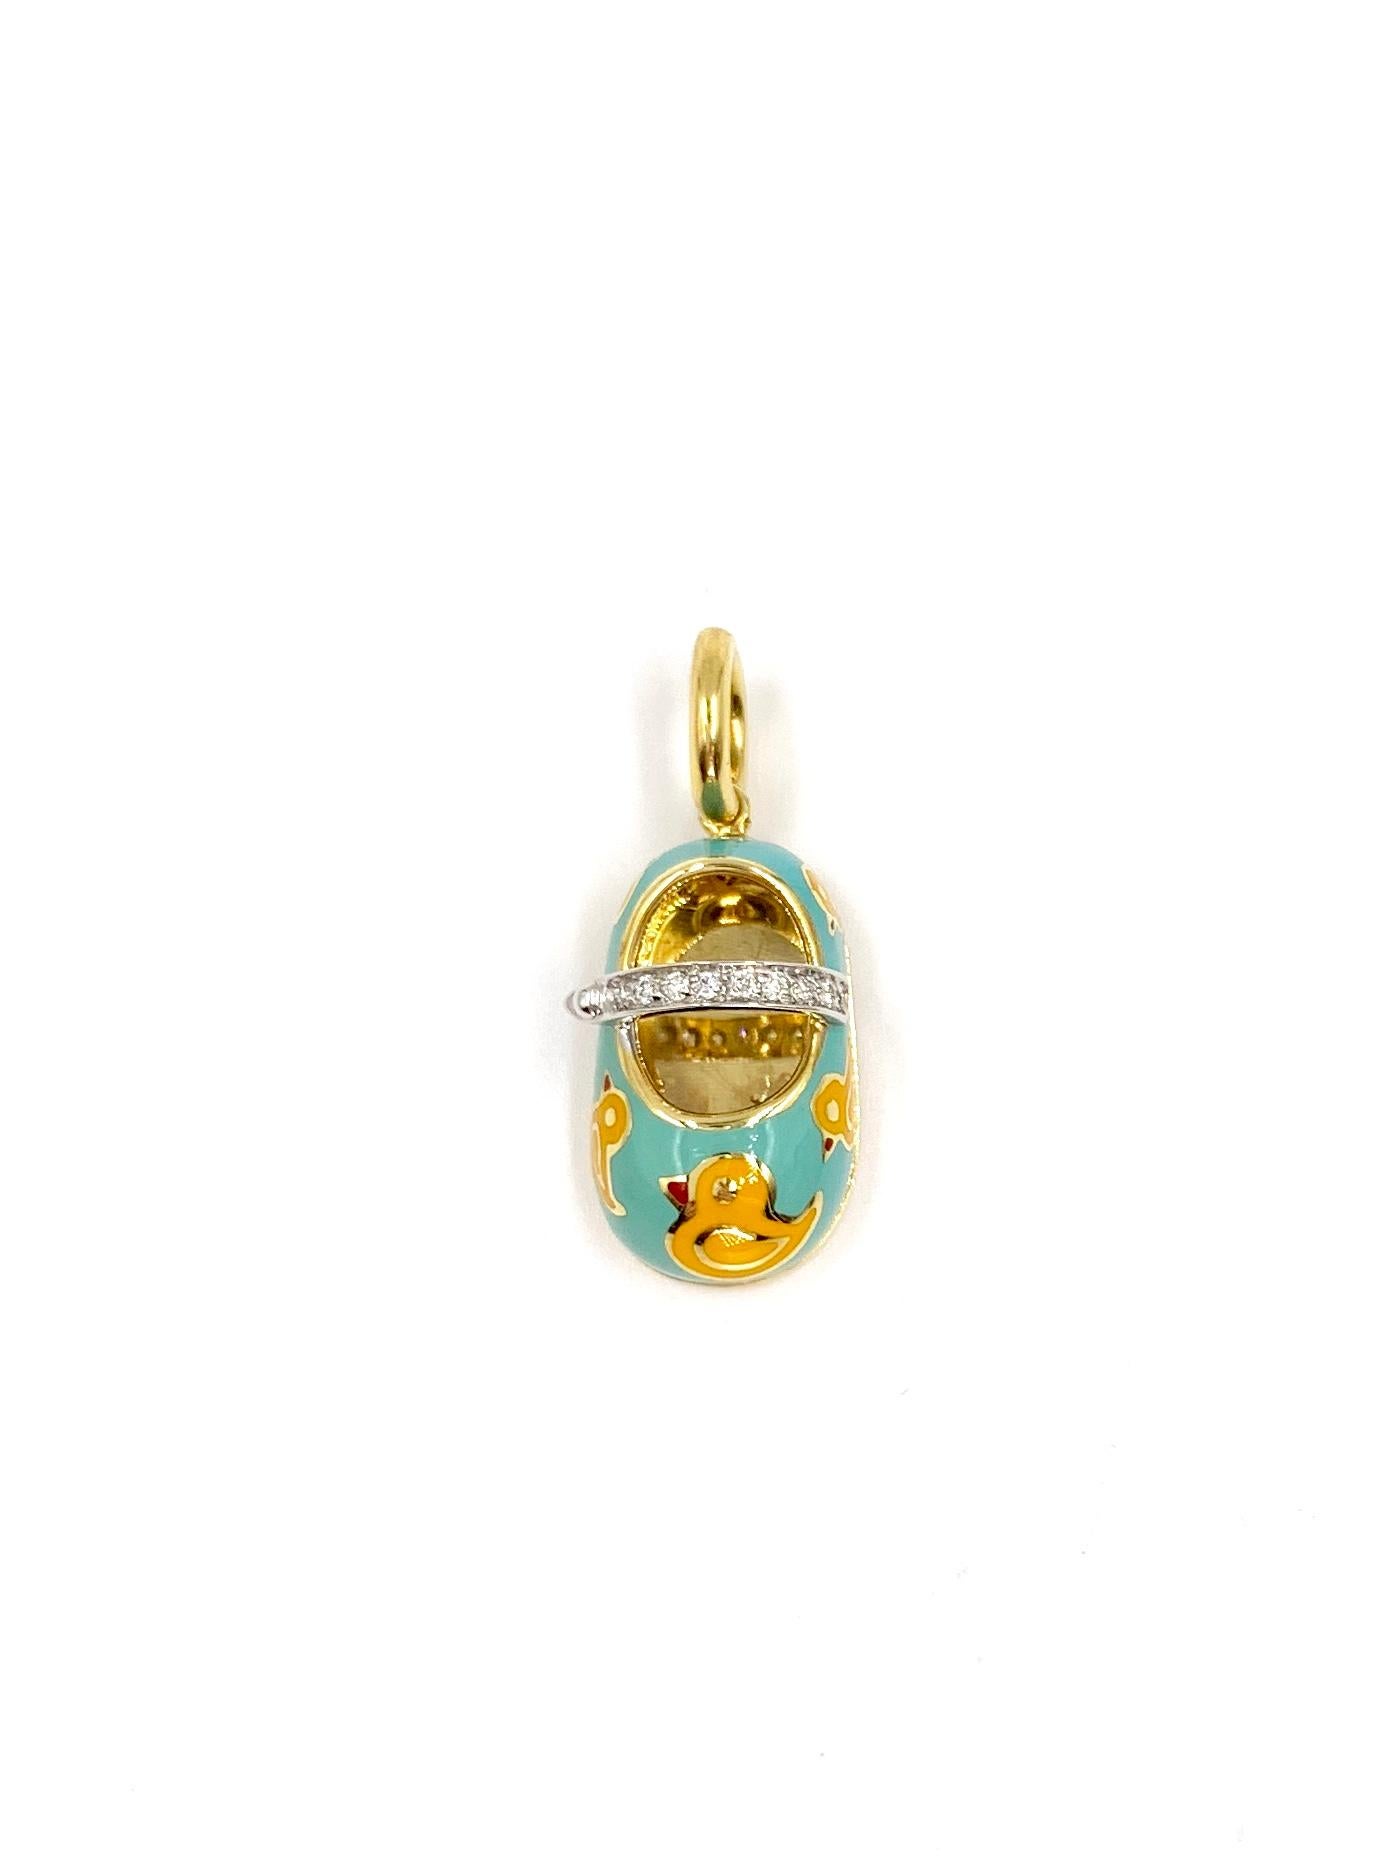 A beautiful combination of whimsy and luxury, the classic Aaron Basha baby shoe charm in 18 karat yellow gold with hand painted blue and yellow enamel rubber duck pattern. Strap of baby shoe is 18 karat white gold with .07 carats of white diamonds.